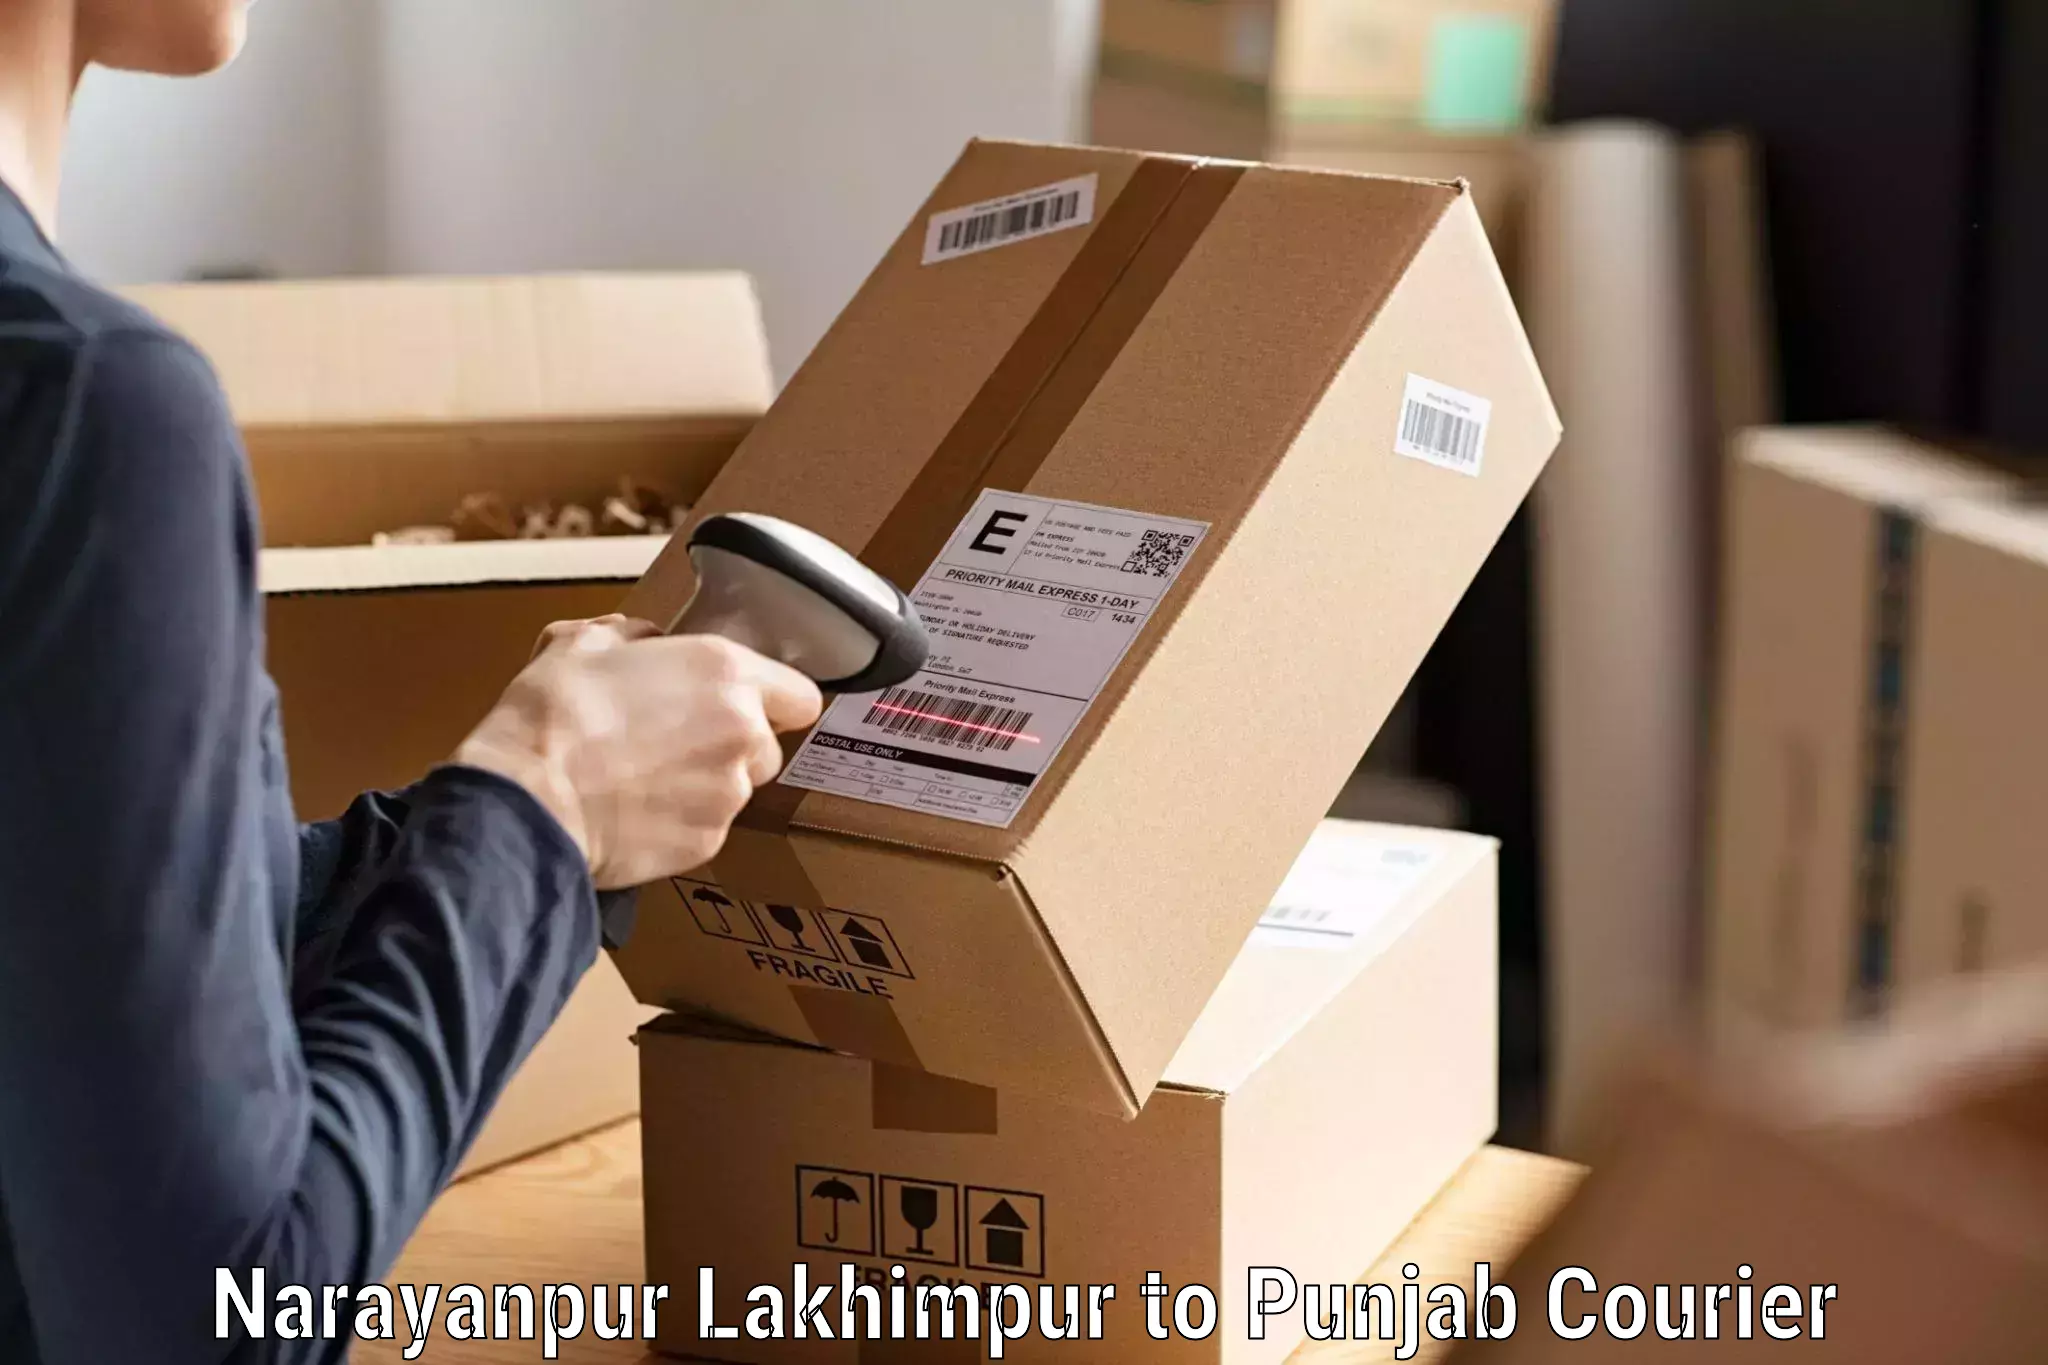 Scalable shipping solutions Narayanpur Lakhimpur to Dhilwan